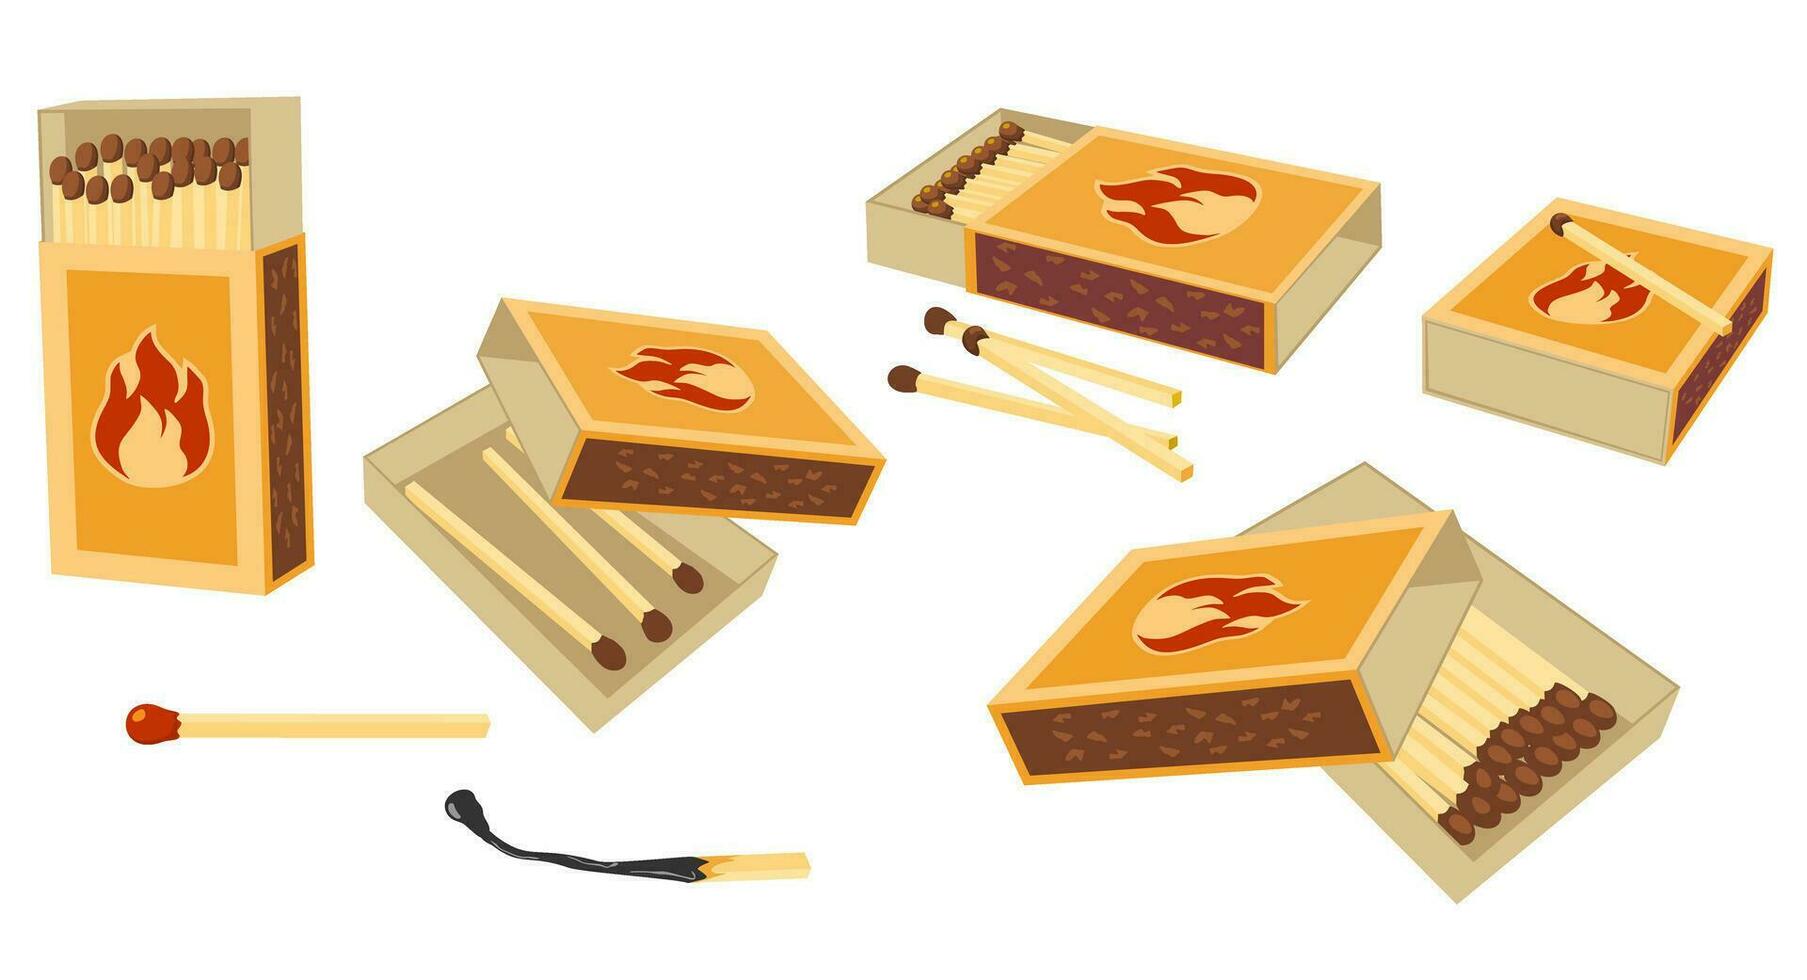 Matchboxes and matches set. Burnt matches and a whole match. Flat design style. Fire safety. Lighting concept vector